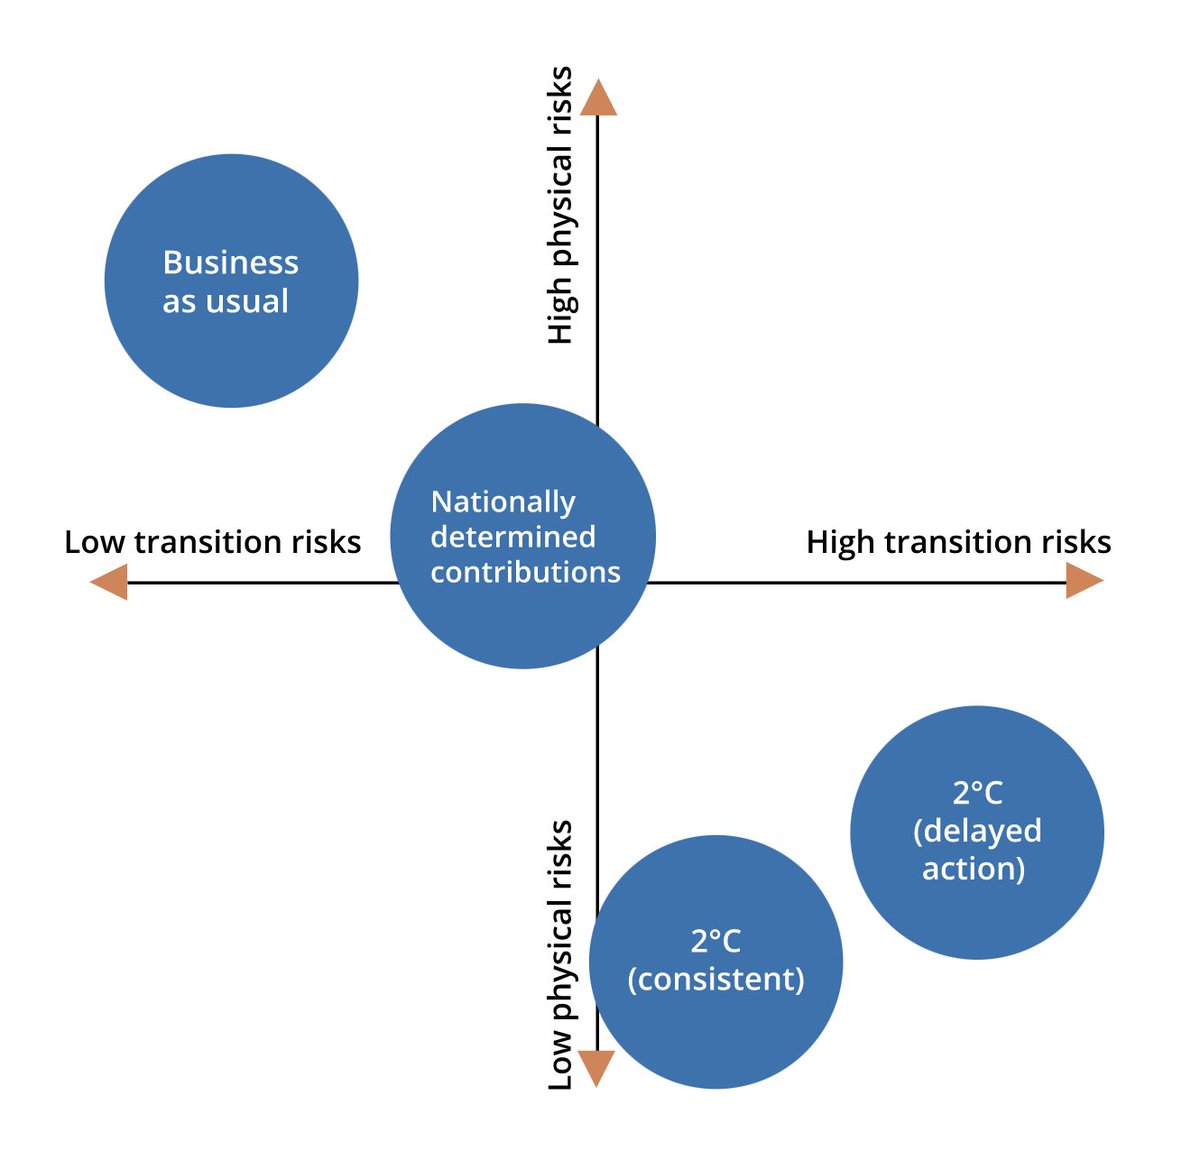 Dustyn Lanz The Bankofcanada Has Published Its Scenario Analysis On The Economic Risks From Climate Change The Chart Shows 4 Scenarios Analyzed Each On A Spectrum Related To The Level